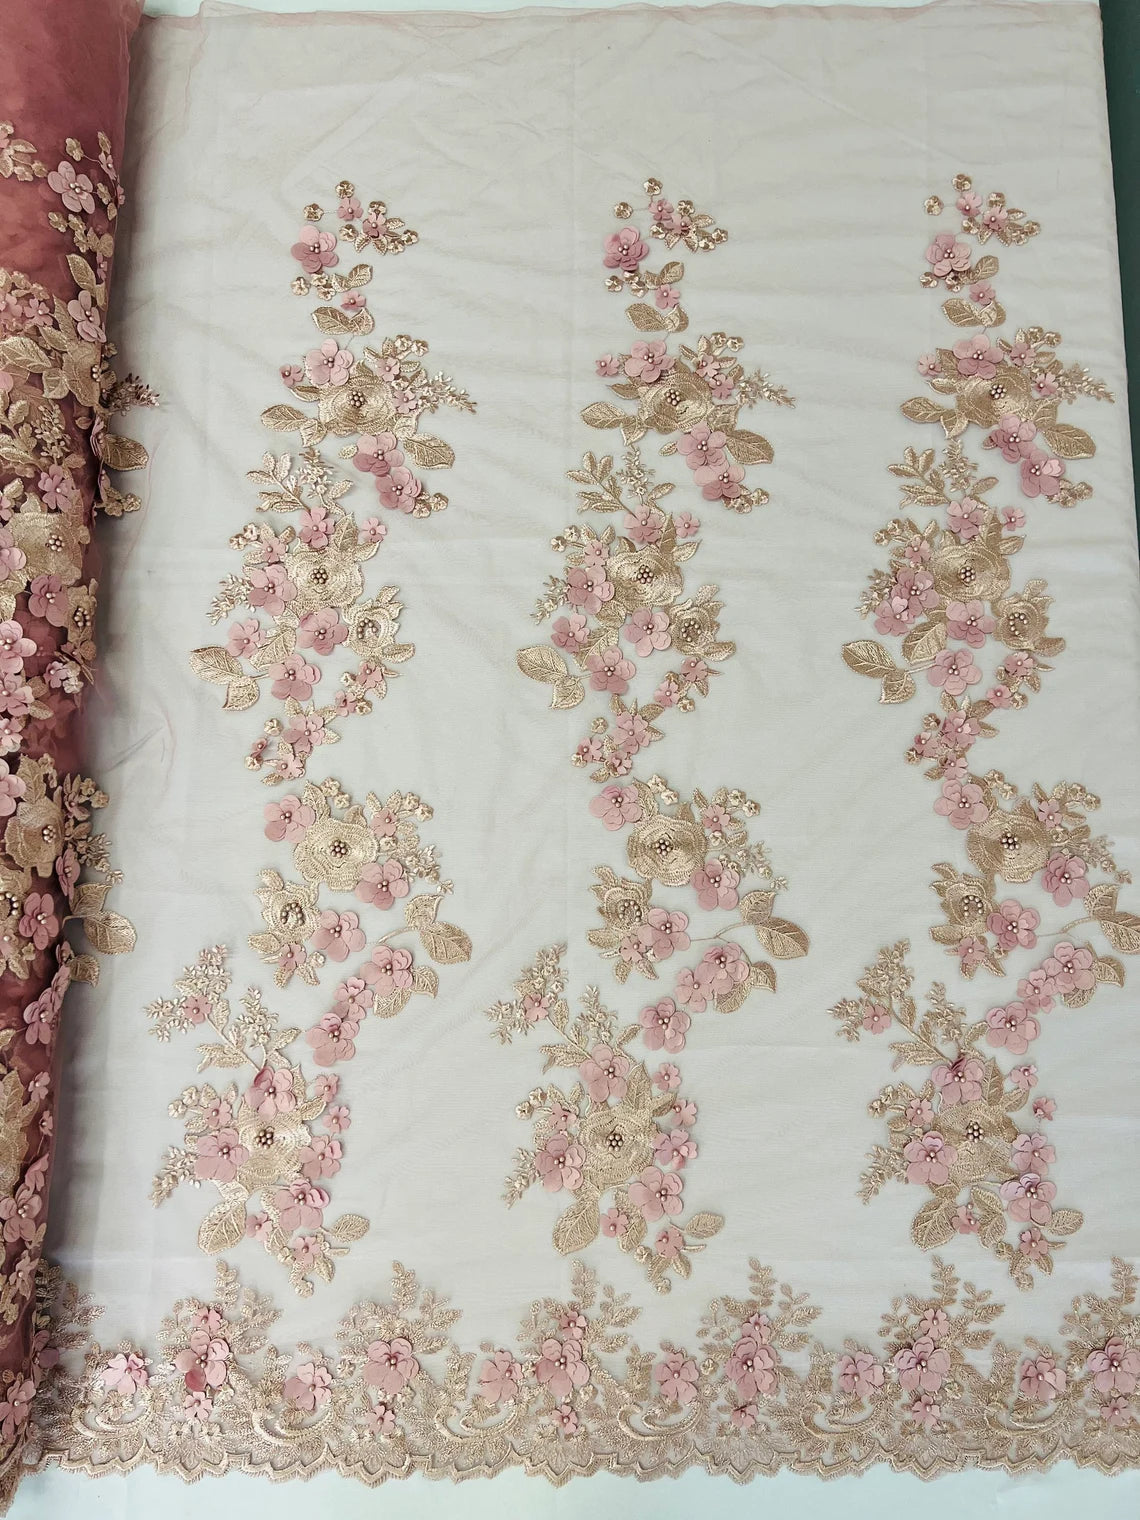 3D Flower Panels Fabric - Dusty Rose - Flower Panels Bead Embroidered on Lace Fabric Sold By Yard